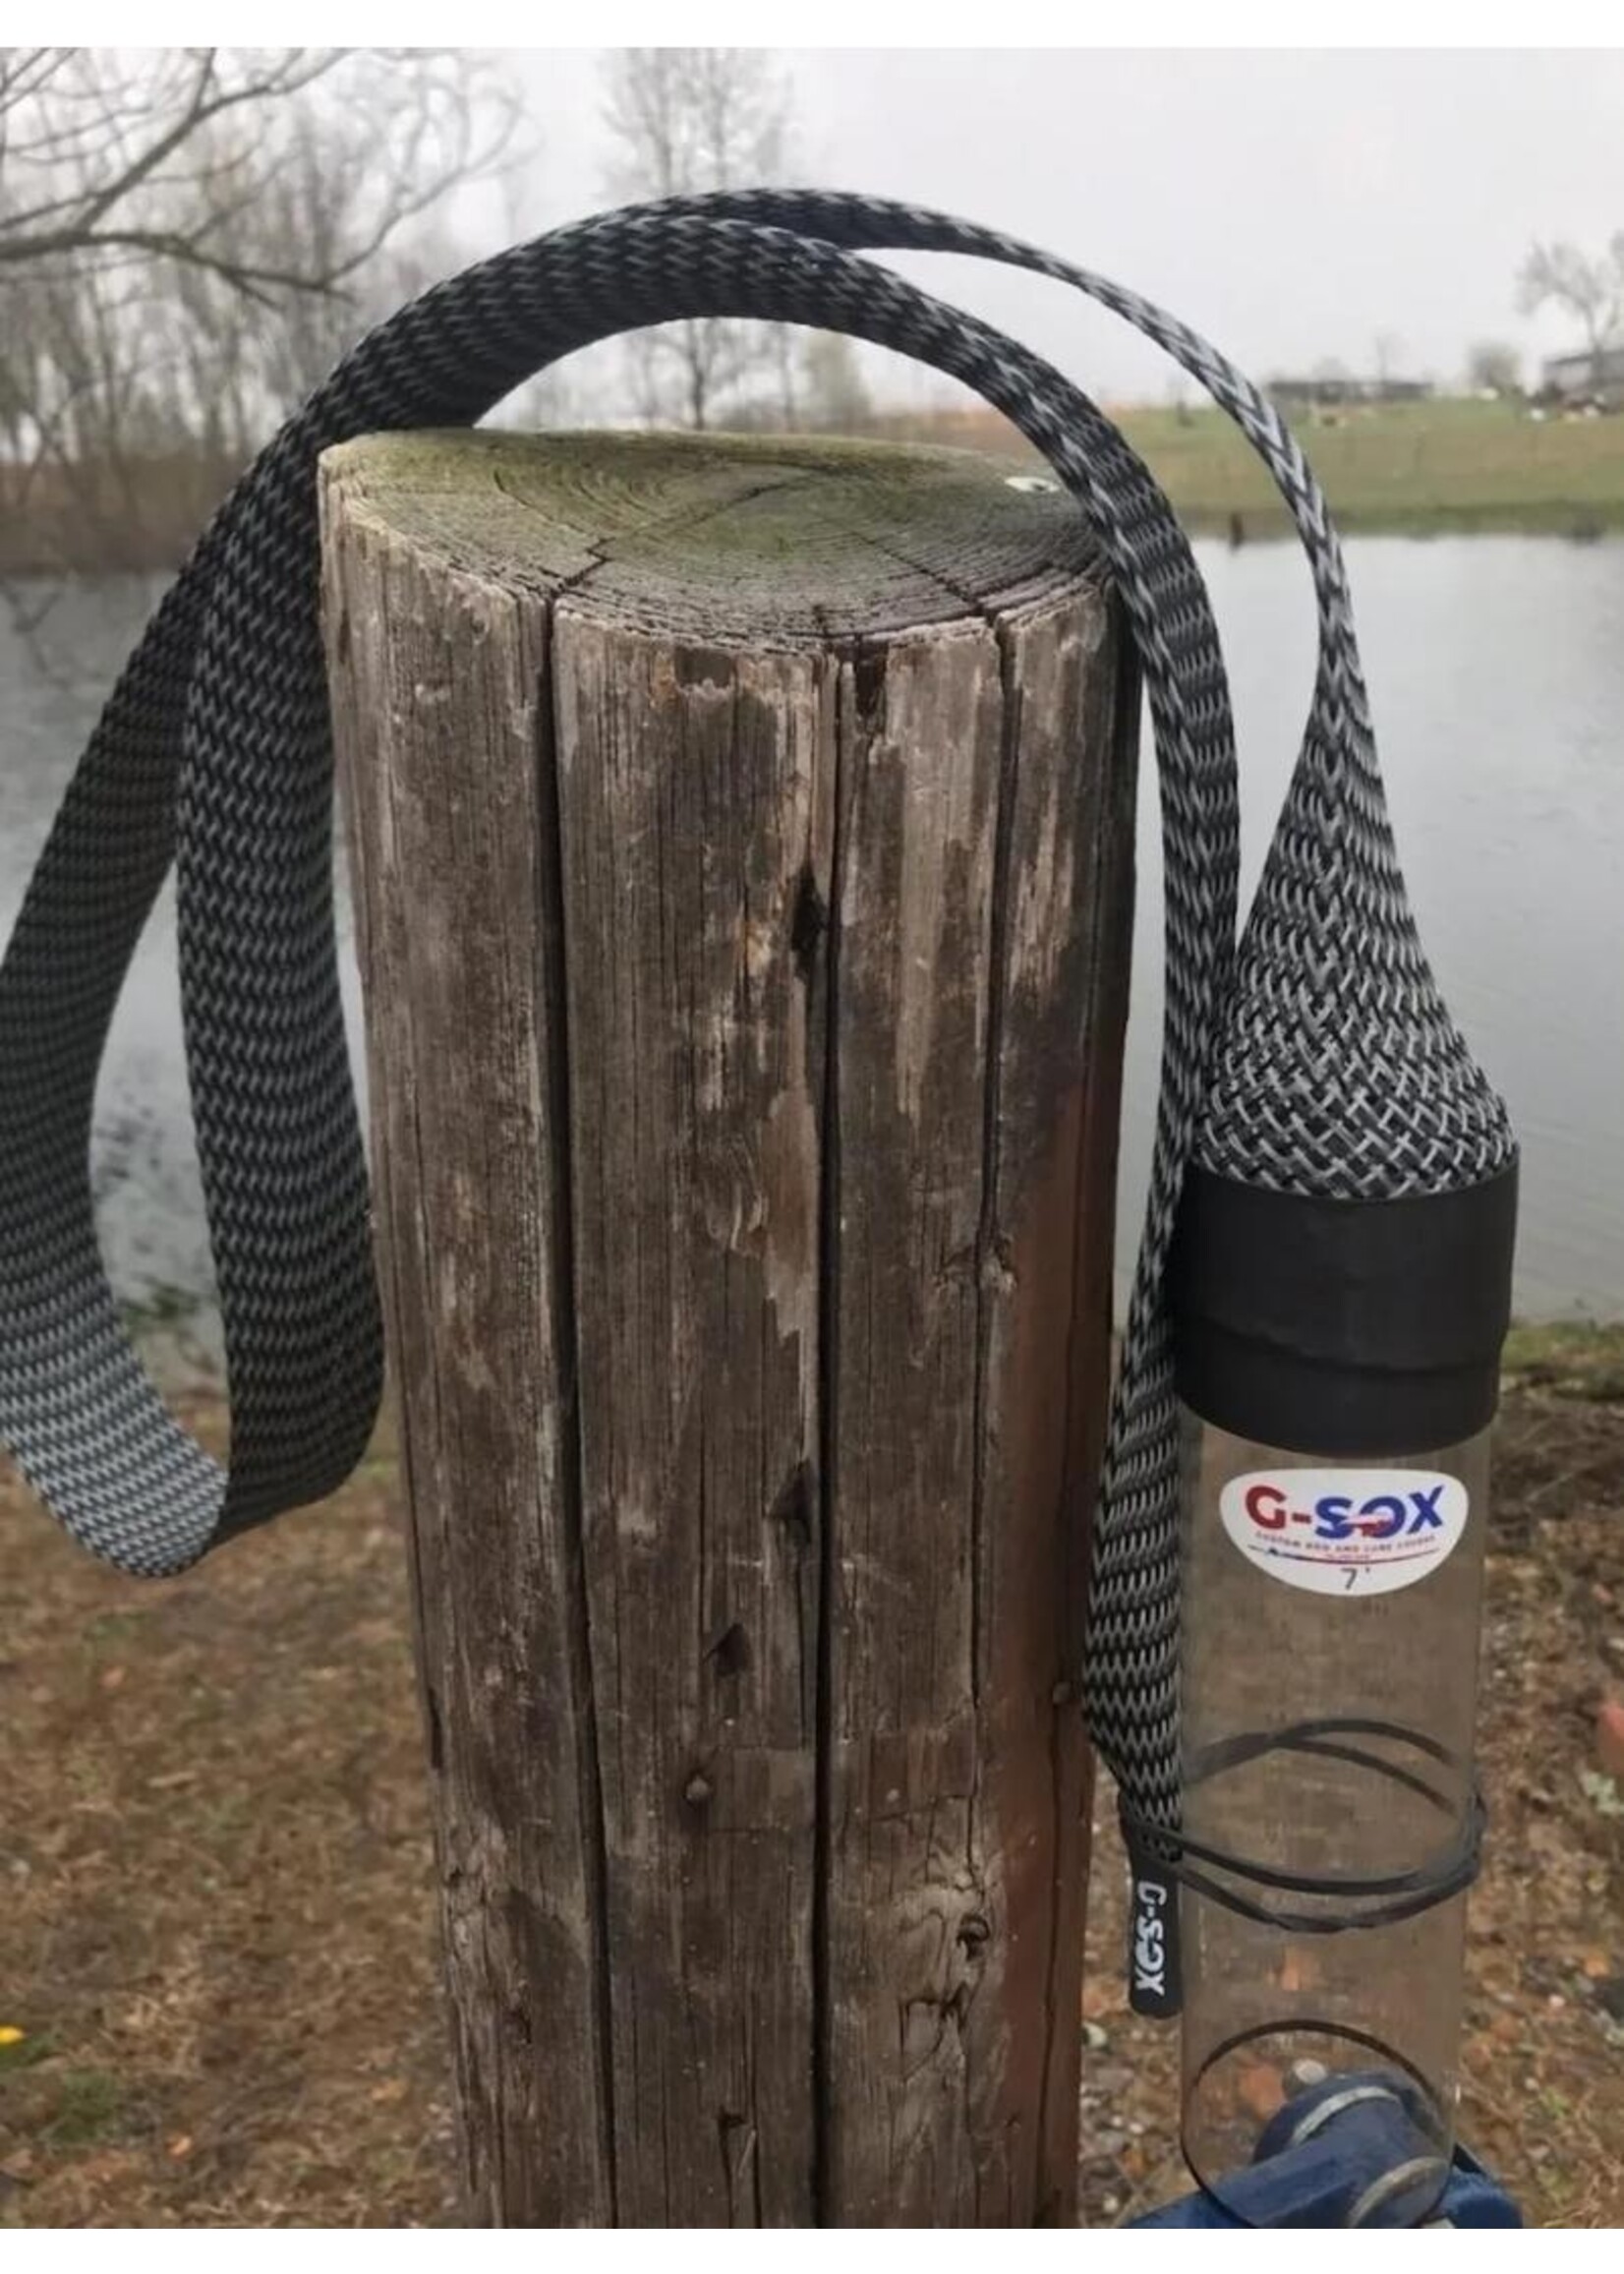 G-Sox - Casting Rod & Lure Cover - Tackle Shack